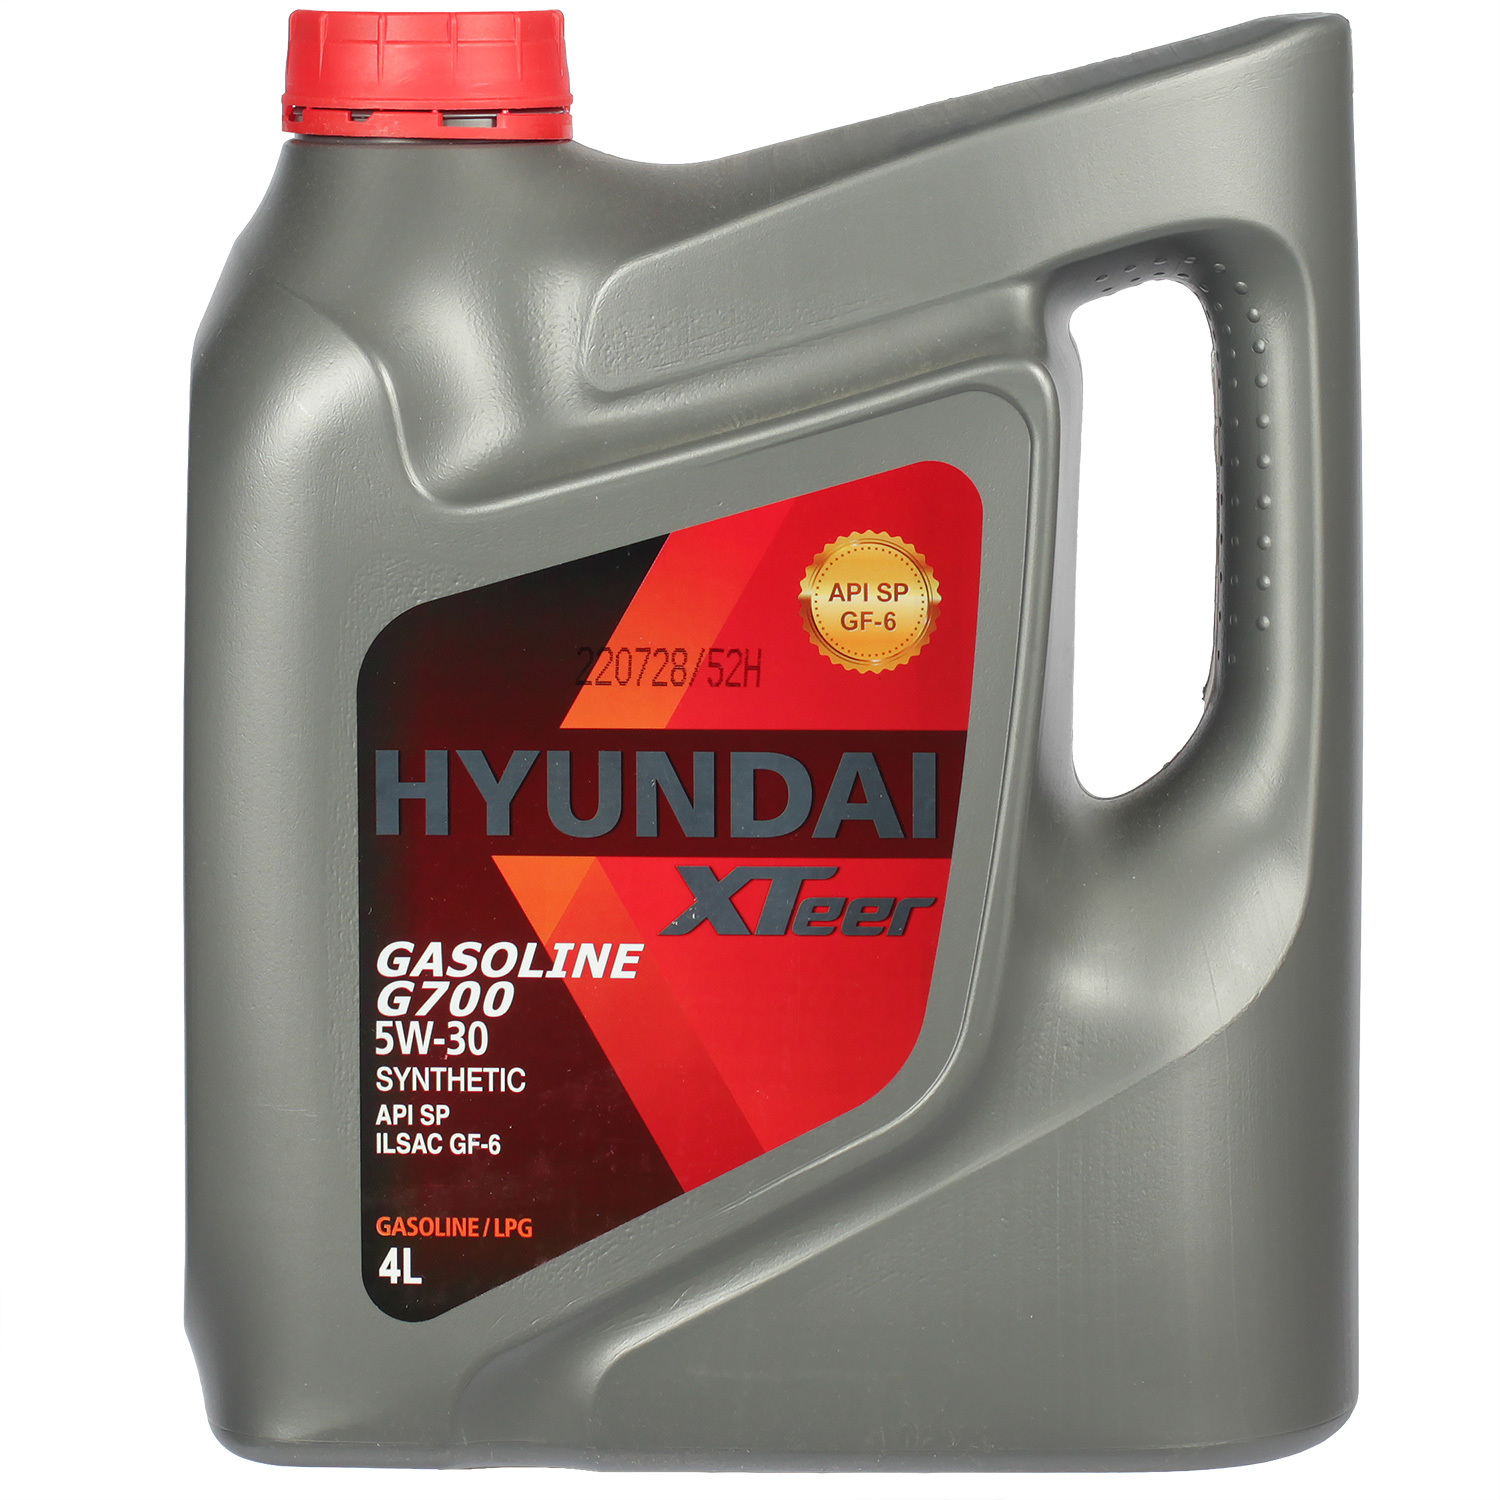 Hyundai Xteer Моторное масло Hyundai Xteer Xteer Gasoline G700 5W-30, 4 л hyundai масло моторное hyundai xteer gasoline ultra protection 5w 40 4л